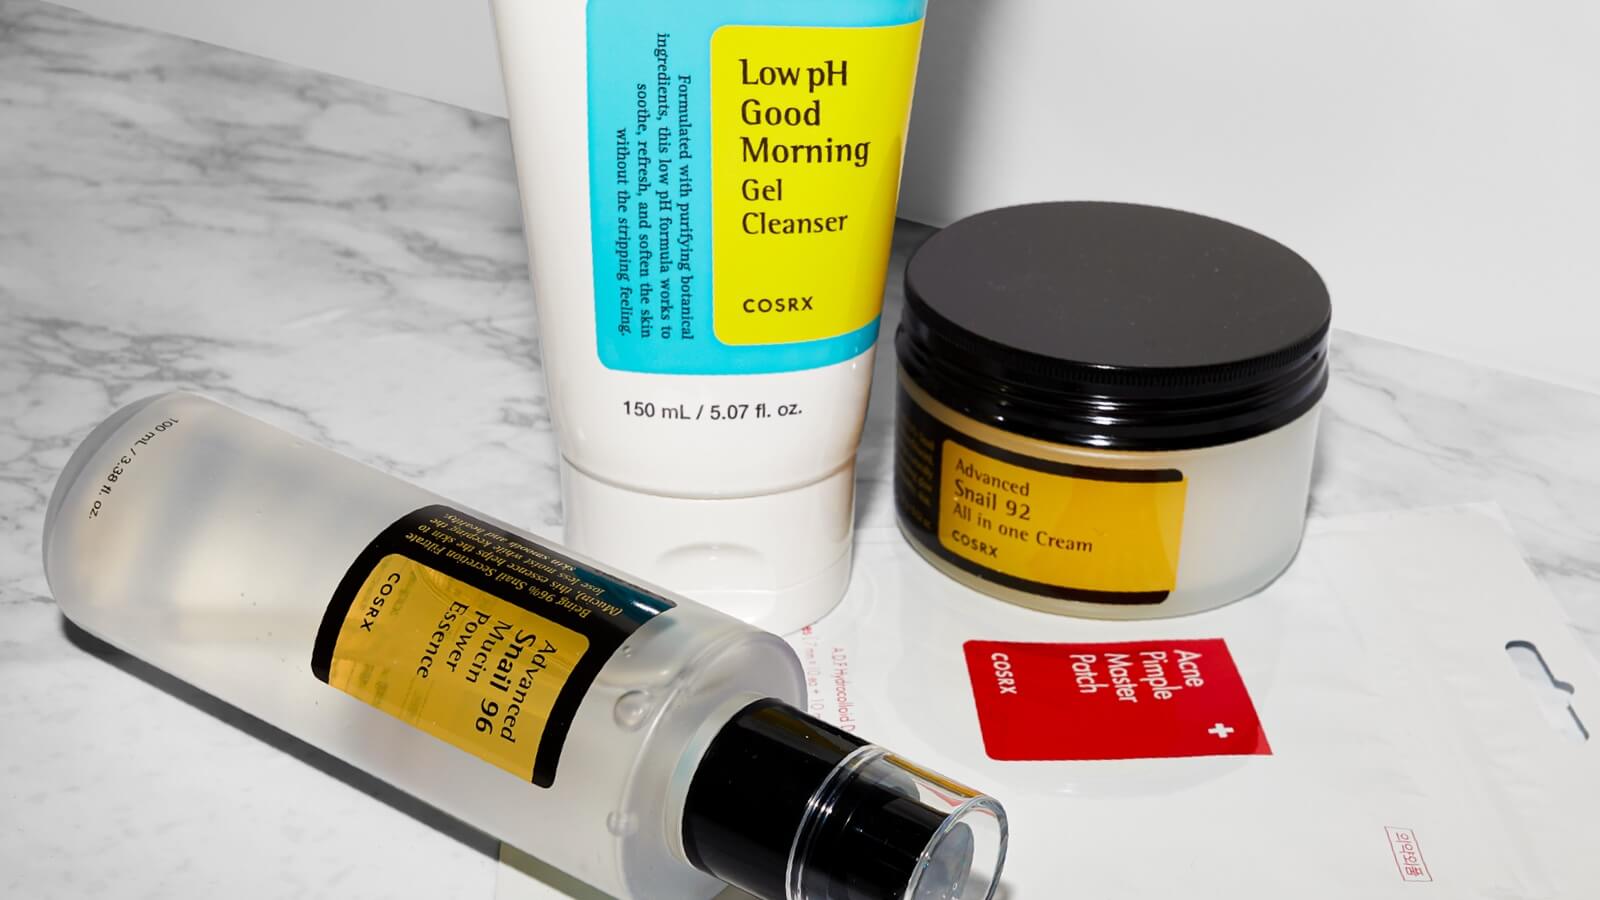 The Best COSRX Products To Add Your Routine - Beauty Bay Edited